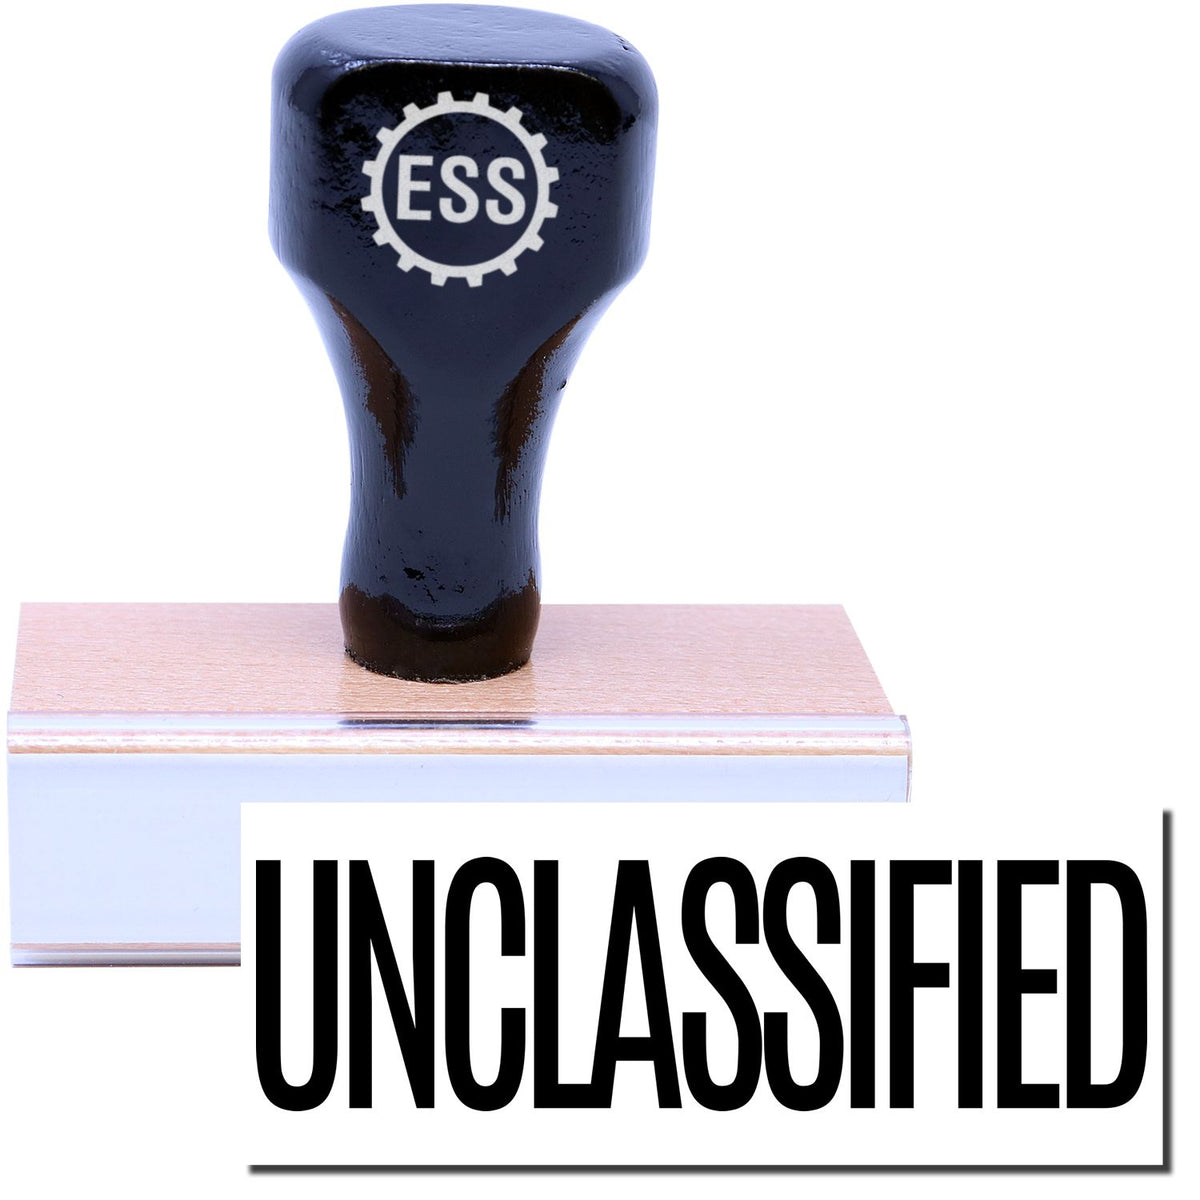 A stock office rubber stamp with a stamped image showing how the text &quot;UNCLASSIFIED&quot; in a large font is displayed after stamping.